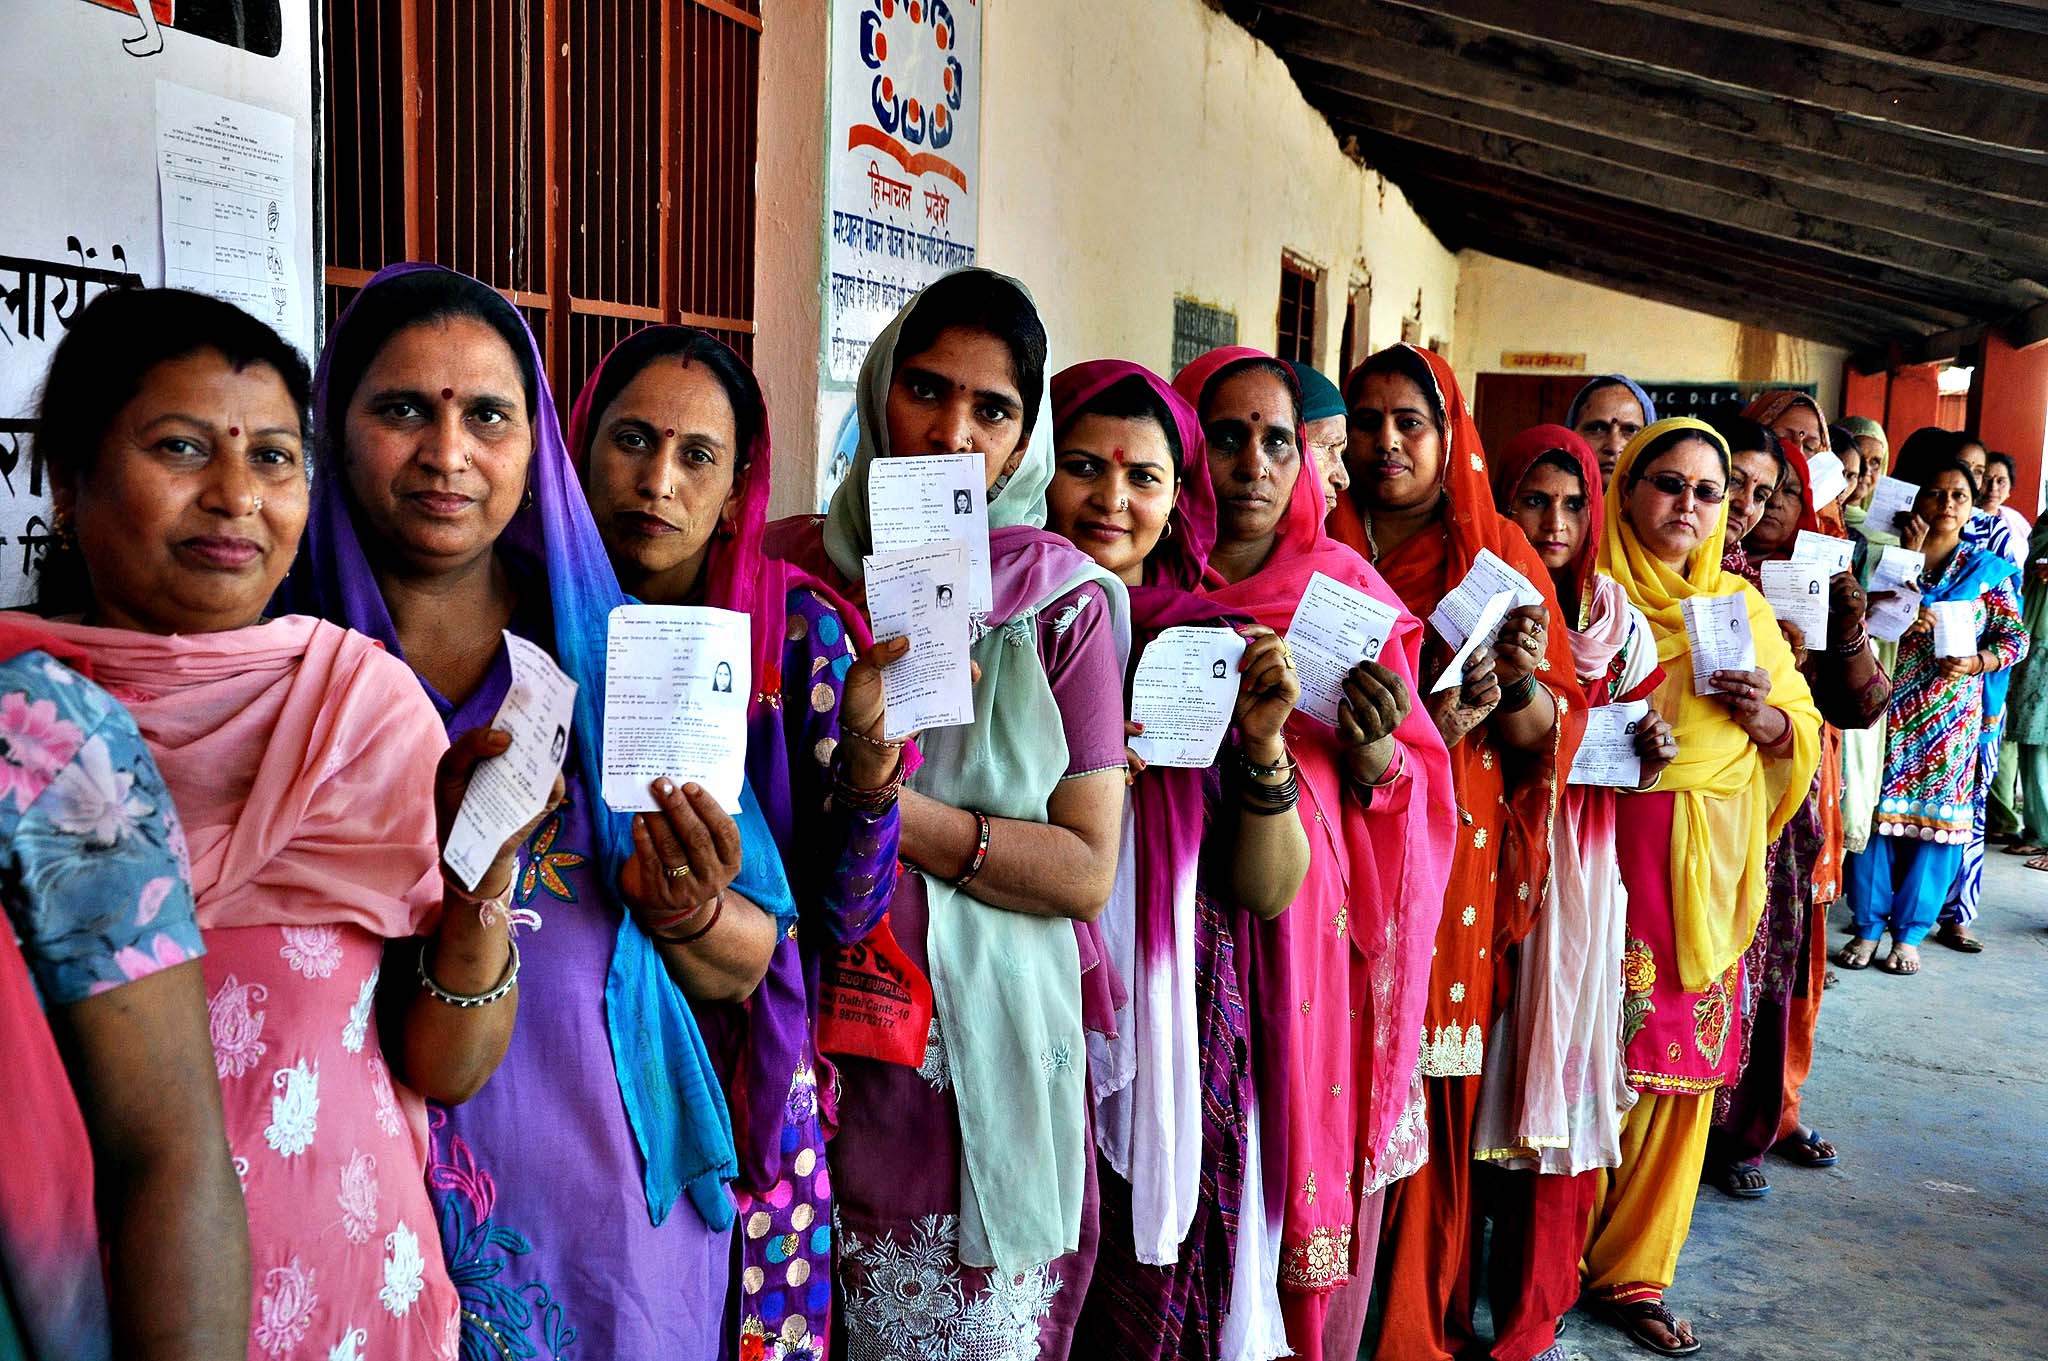 Voting during 8th phase of Parliamentary election...epa04194527 Indian women show their voting slips as they wait to cast their votes at a polling station during the 8th phase of Parliamentary election at Palampur, Himachal Pradesh, India, 07 May 2014. Parliamentary elections in India are being held in nine phases between 07 April and 12 May 2014. A total of 814.6 million people are eligible to vote, around 100 million more than in the elections in 2009. EPA/SANJAY BAID